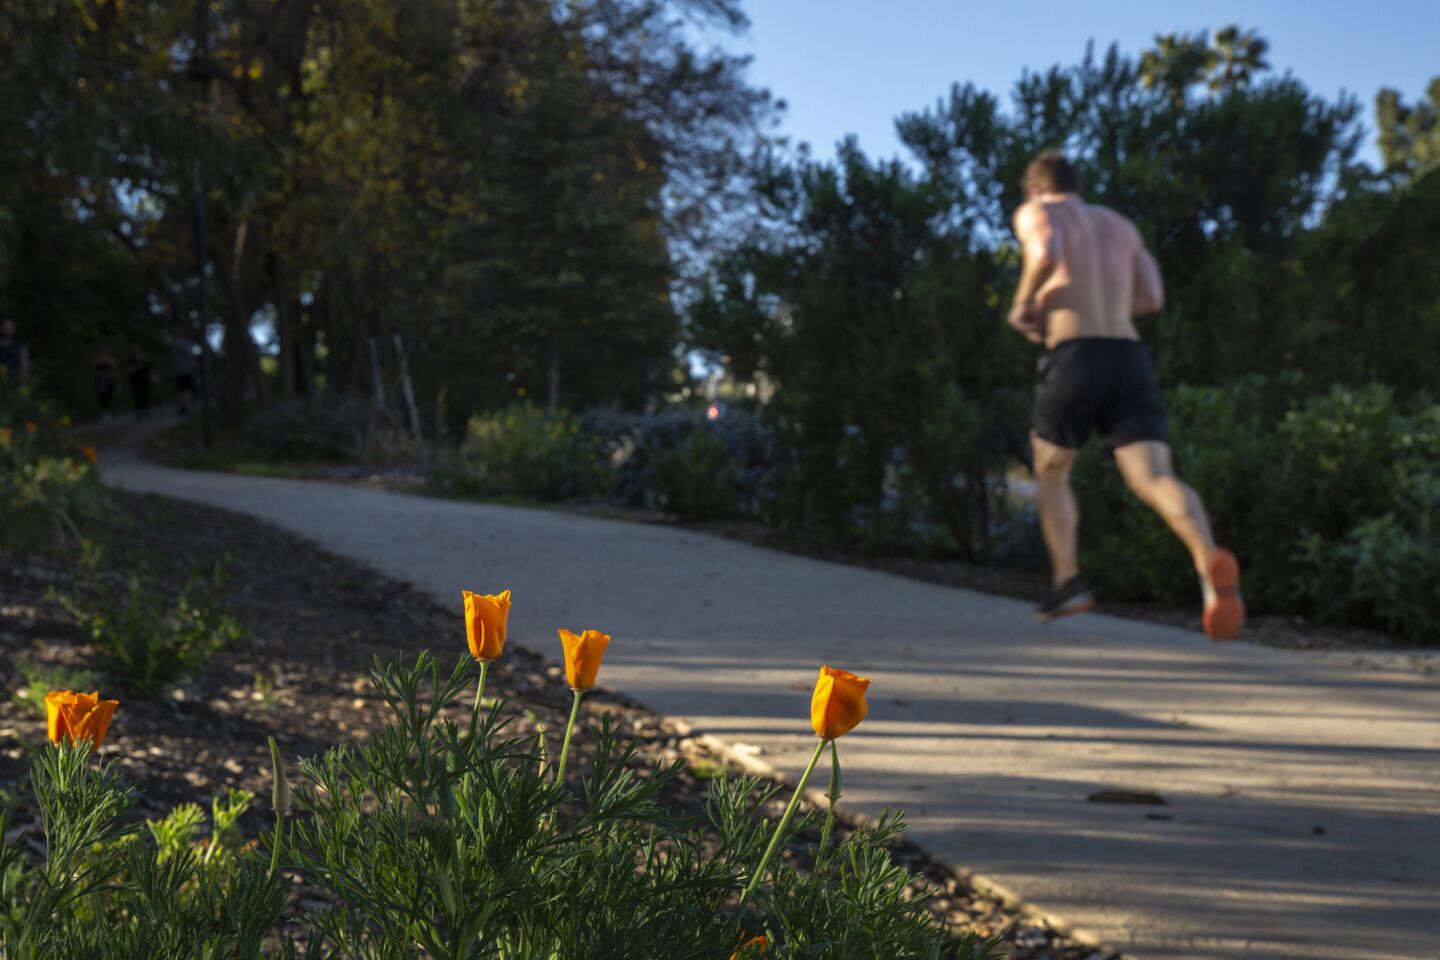 Silver Lake Reservoir is a great place for jogging or admiring a patch of California poppies.